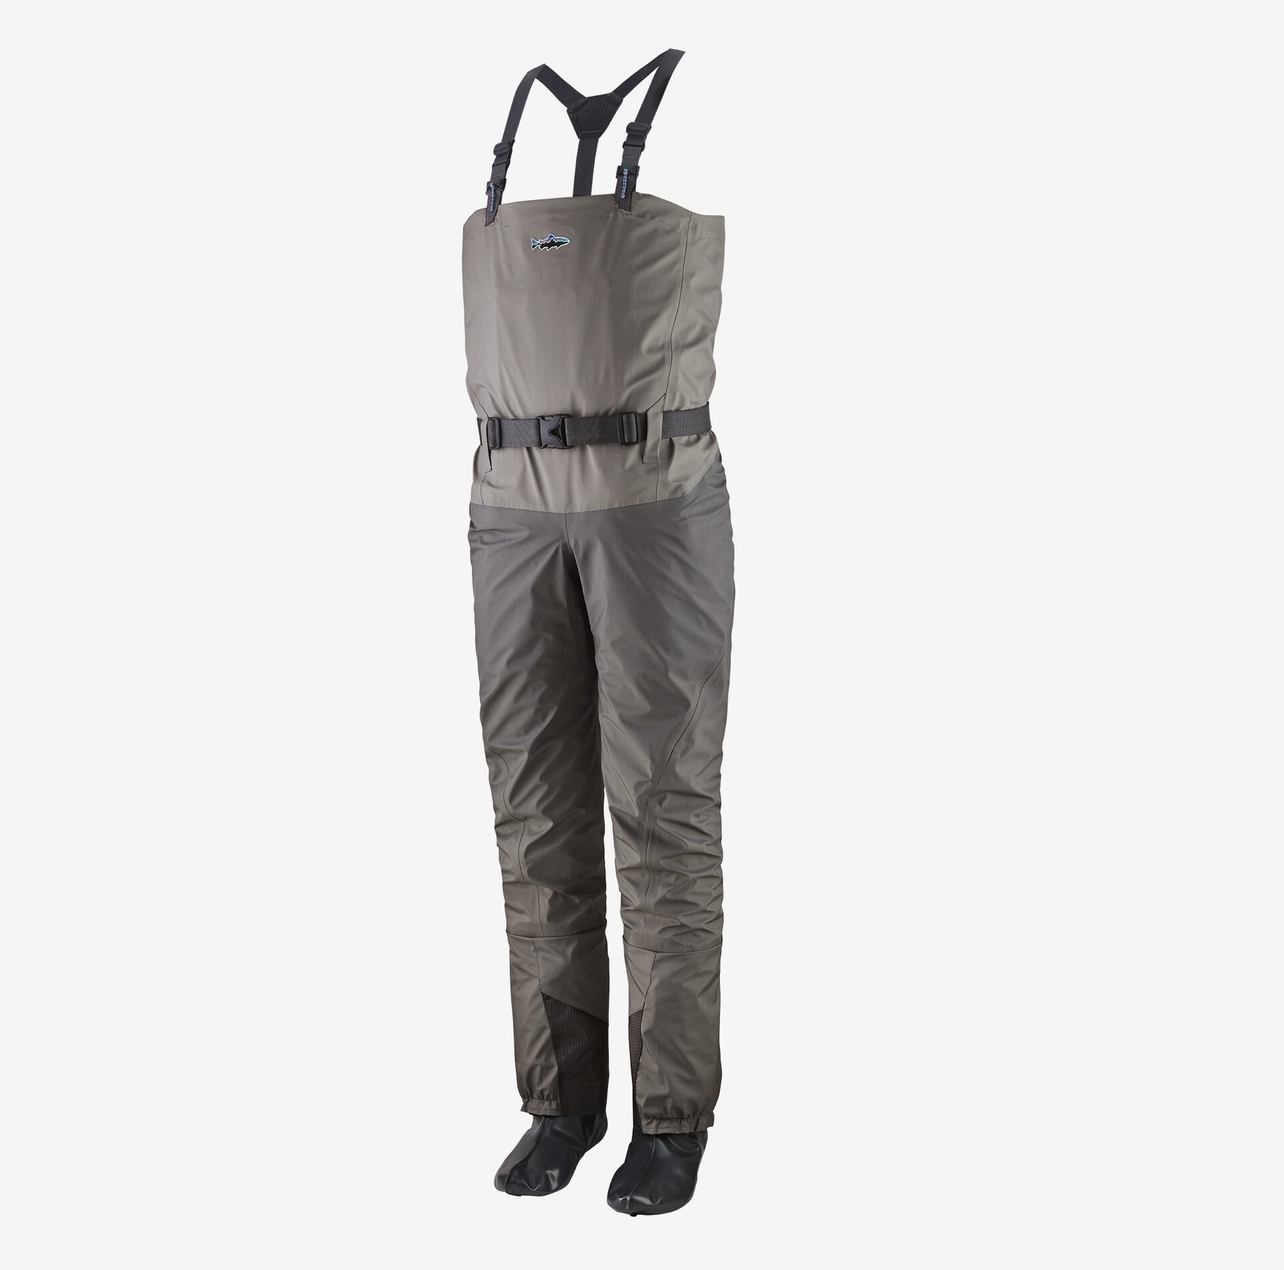 Patagonia M's Swiftcurrent Ultralight Wader - 2RM